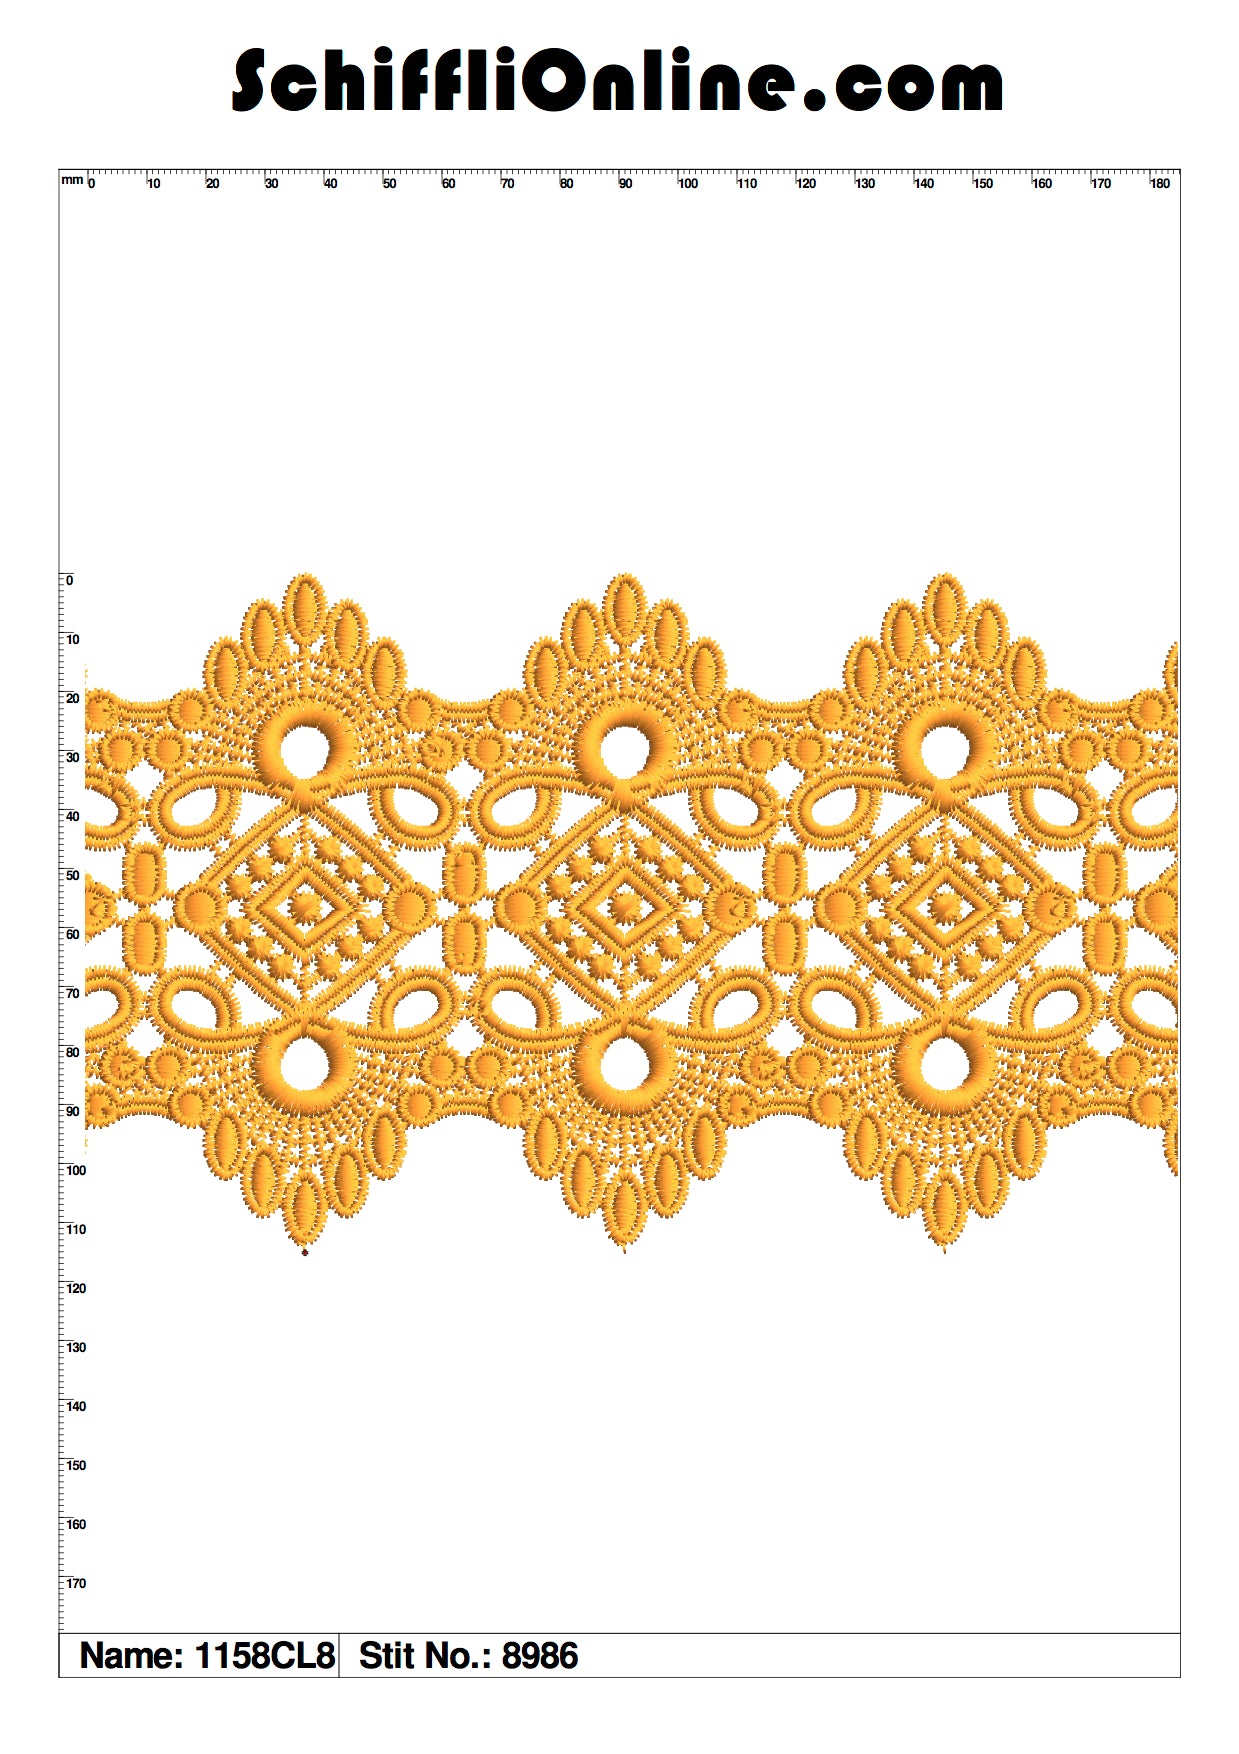 Book 140 CHEMICAL LACE 8X4 50 DESIGNS